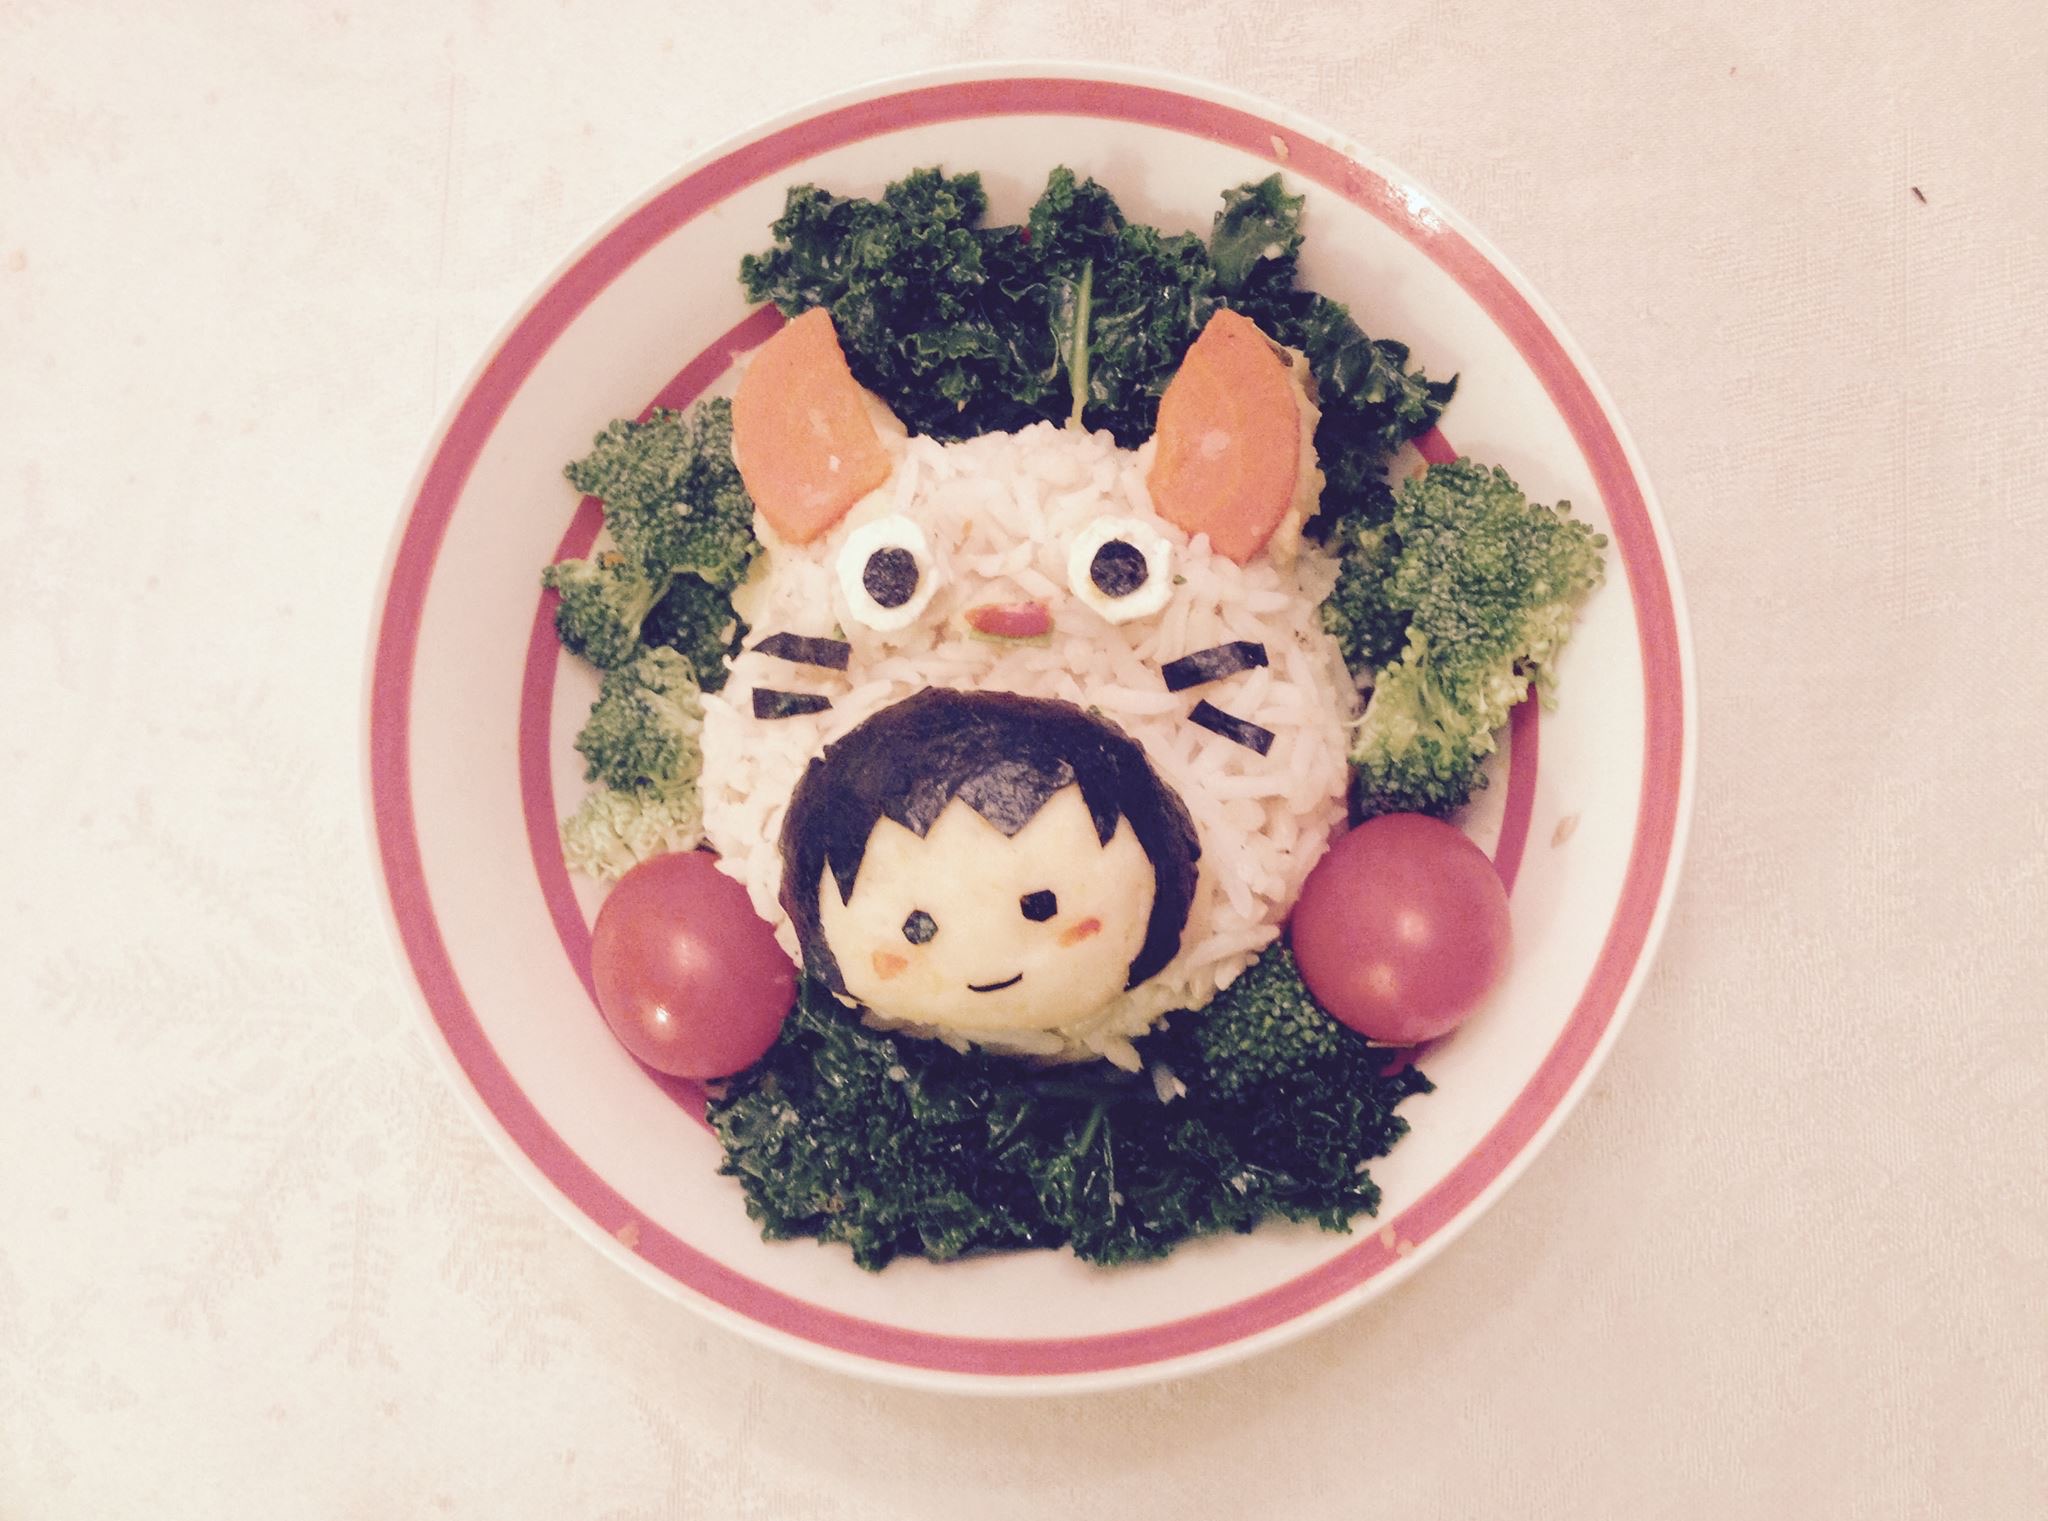 Girl in Cat Costume Food Art - made from rice, carrots, mashed potatoes, seaweed